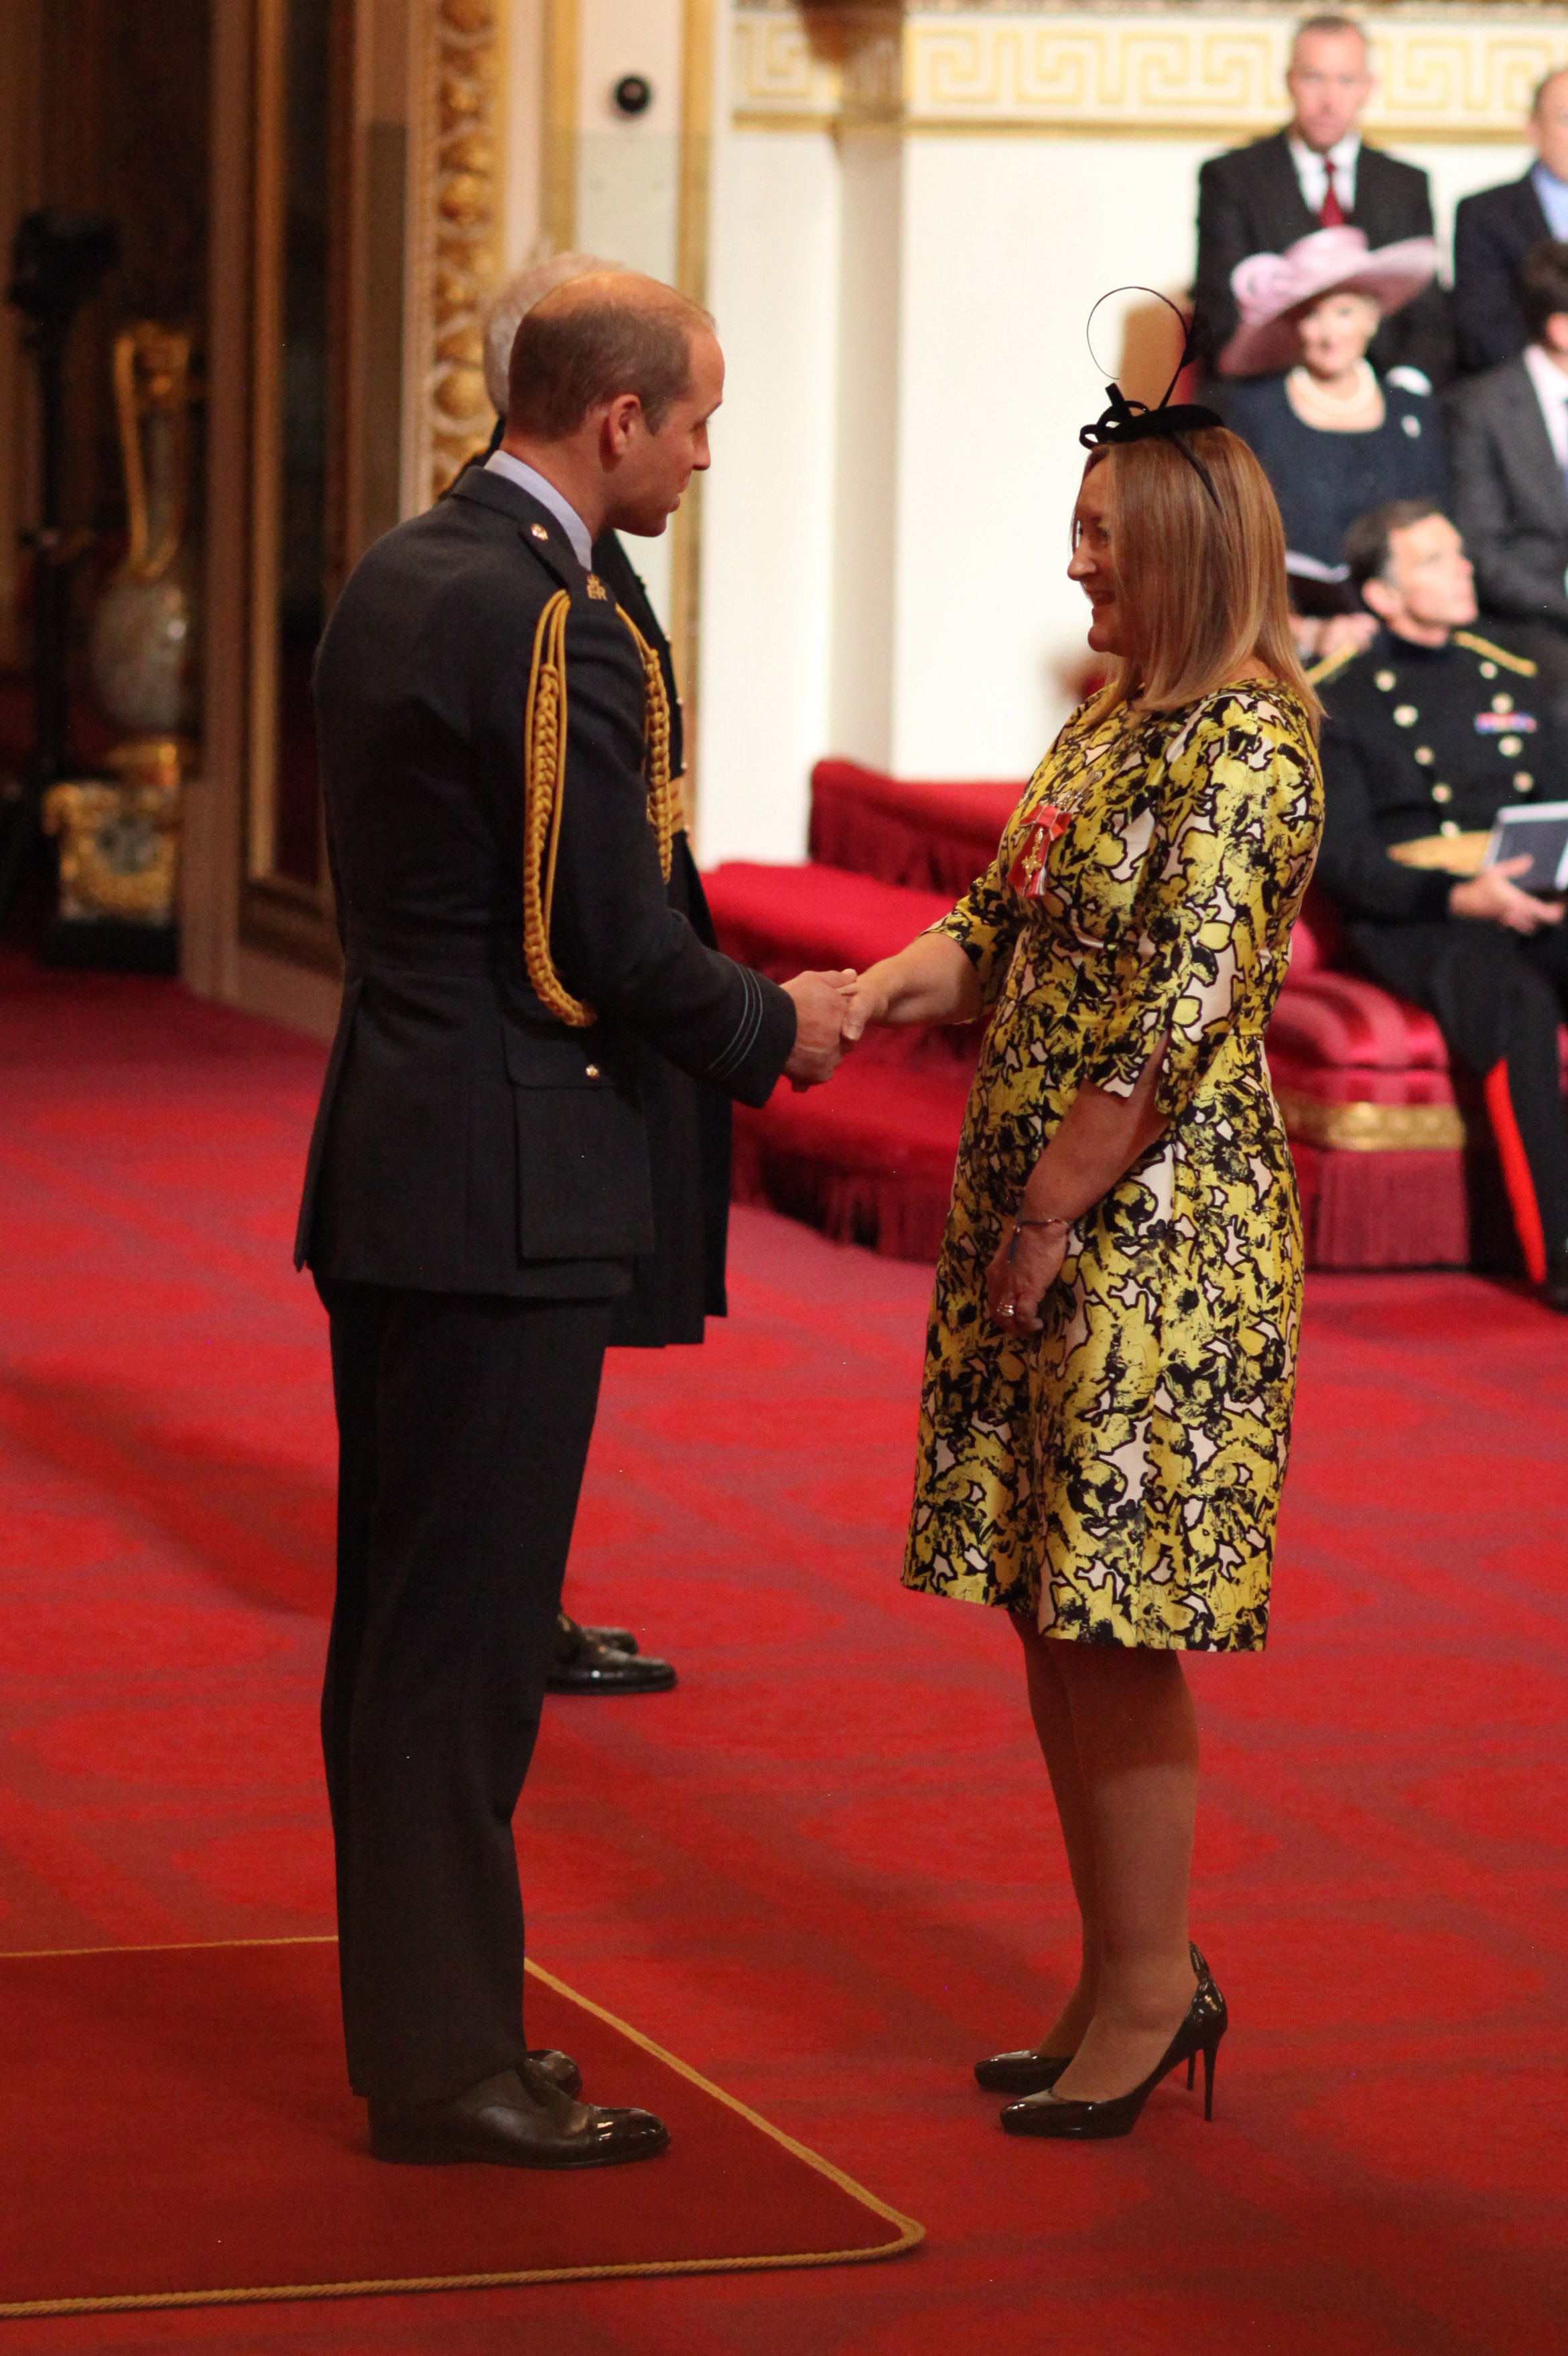 Congratulations - Basildon resident Deborah Rogan shakes hands with Prince William as she is made an OBE in 2016